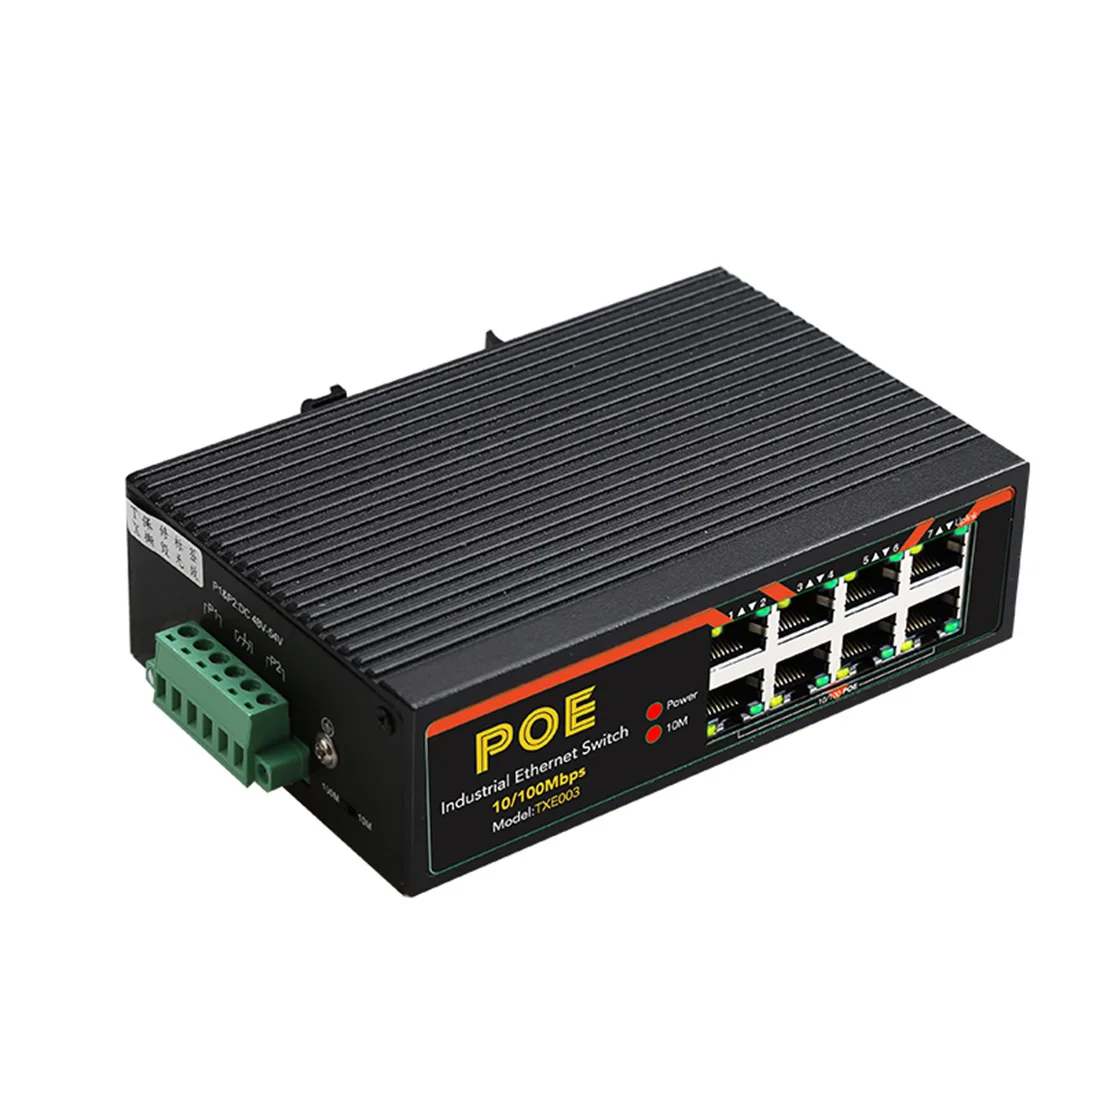 8 Ports Industrial Grade Fast Ethernet Switch 10/100Mbps POE Network Adapter Switch DIN Rail Type Network RJ45 Lan